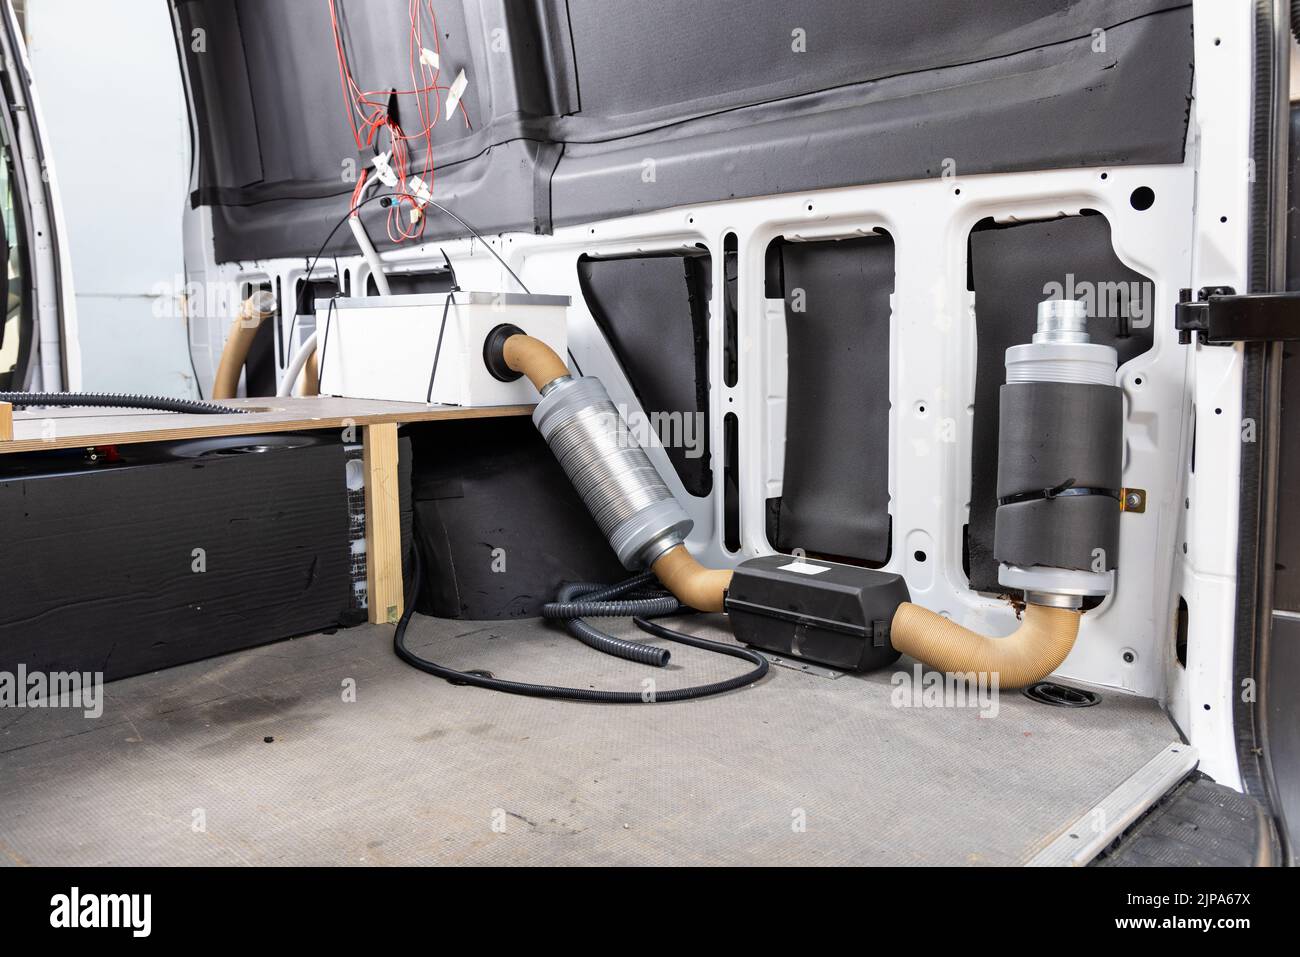 Heating system in a camper van Stock Photo